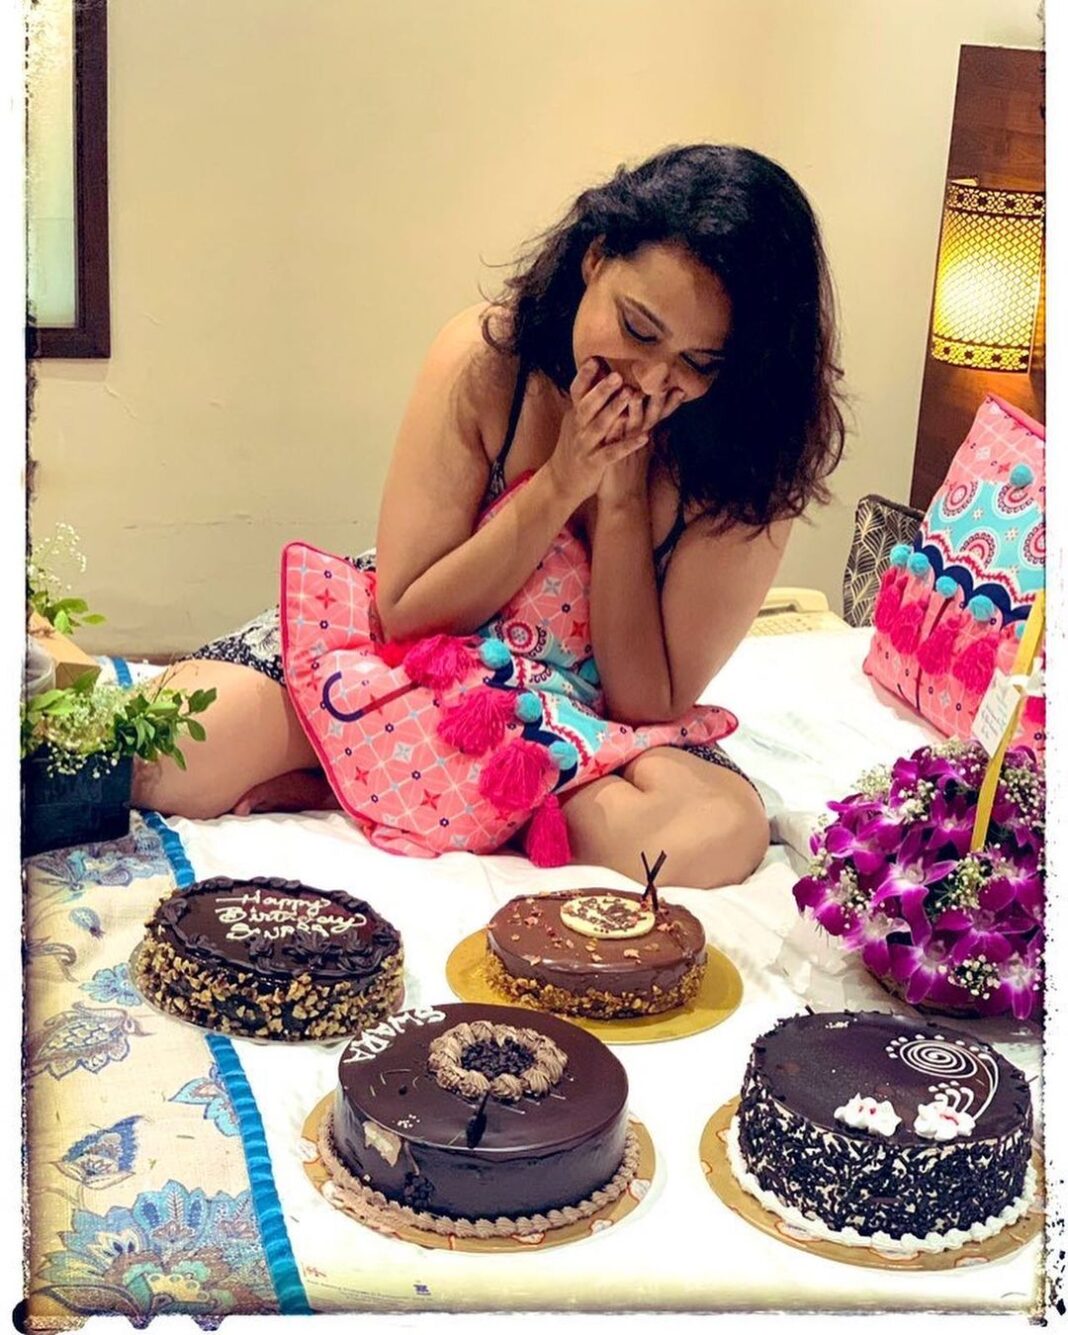 Swara Bhaskar Instagram - I ended up having a 3 day long birthday, and was showered with so much affection & attention by family, friends & tweeple that I’m love soaked!! 😻 तहे दिल से Thank you all for the wishes & kind words. Apologies for being unable to reply to each! But heartfelt gratitude! You made my day(s) SO special 💙💚💛 Goa